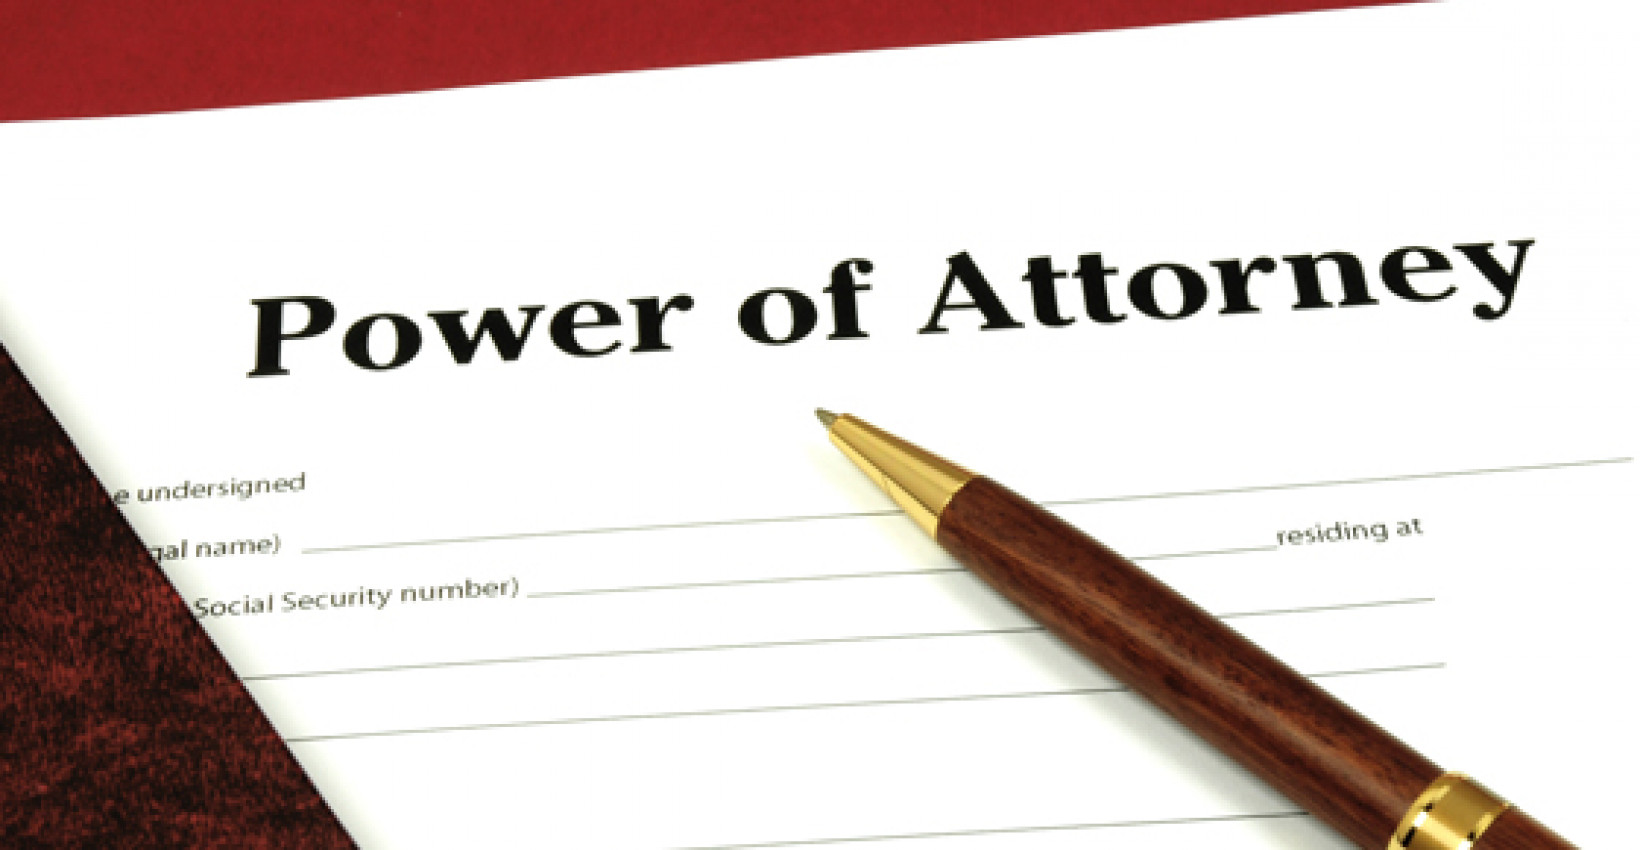 A pen resting on a document called Power of Attorney